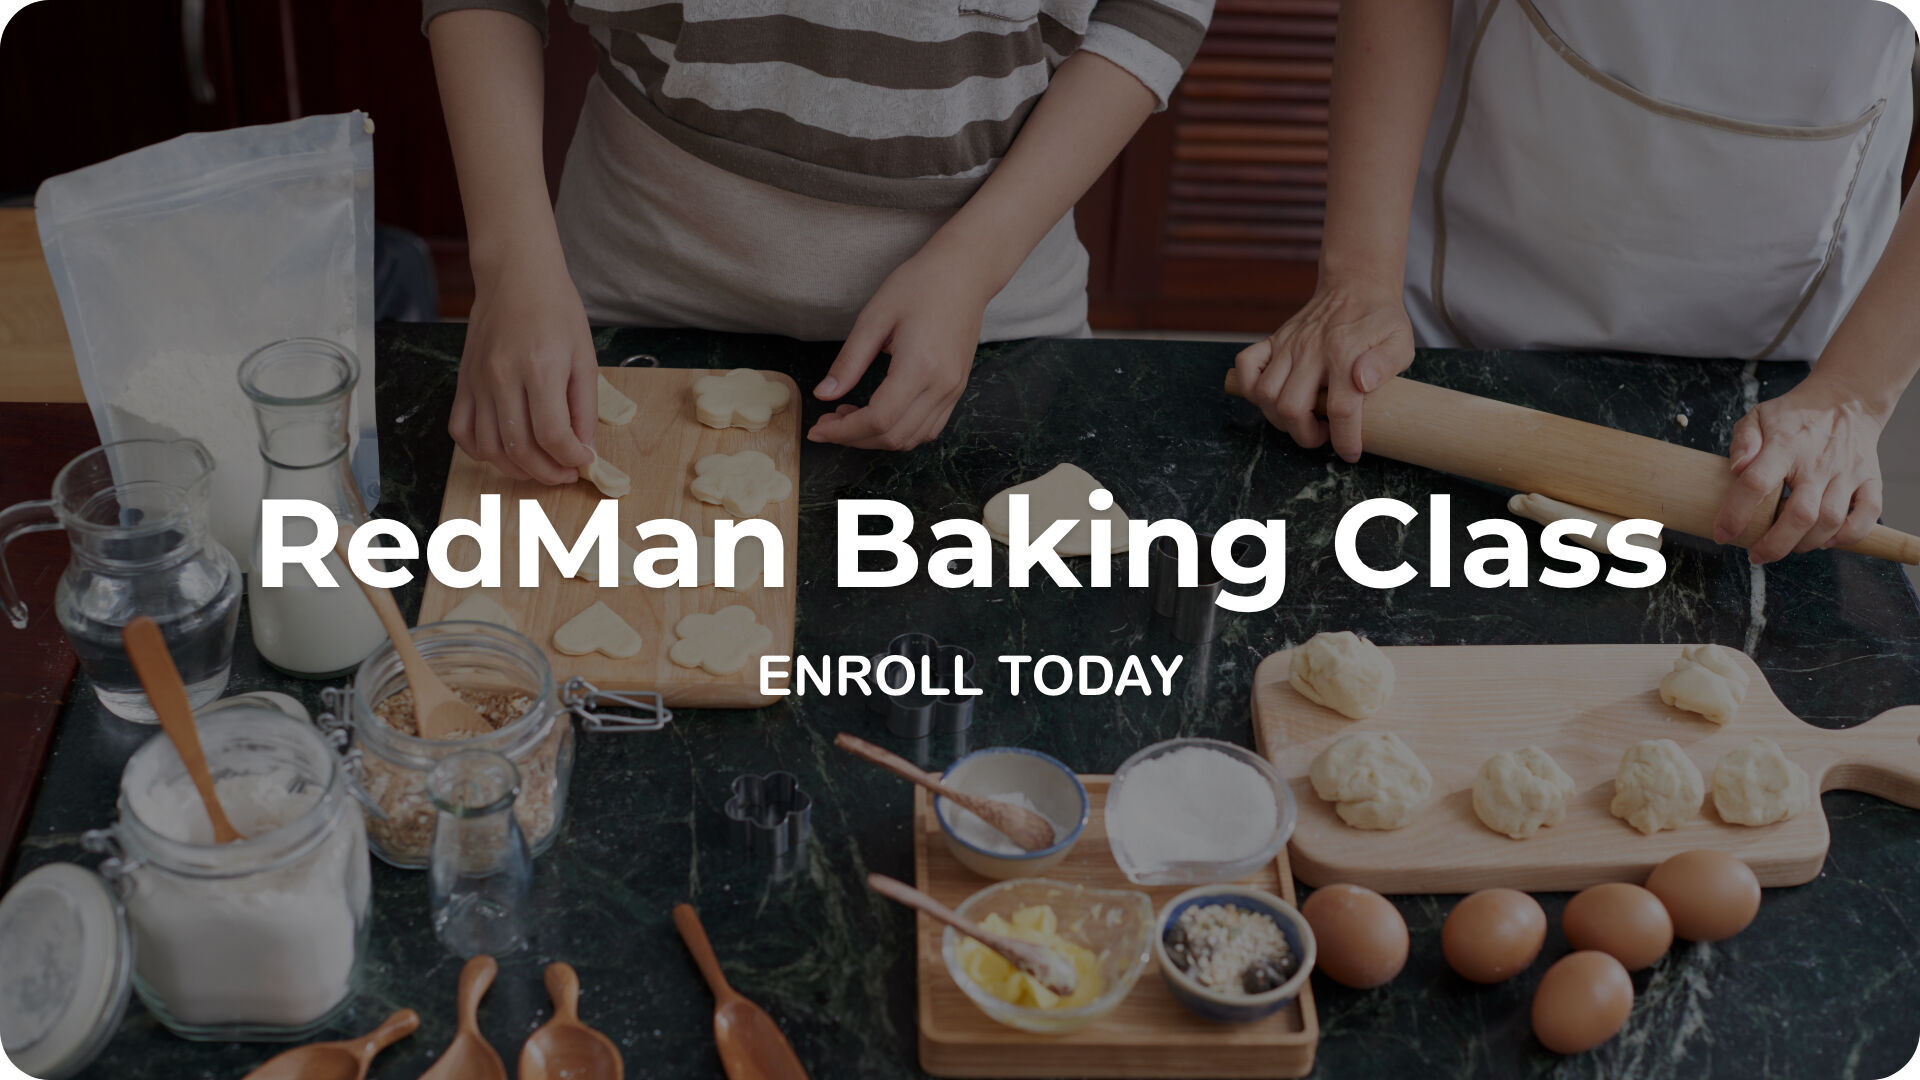 Learn baking from our chefs